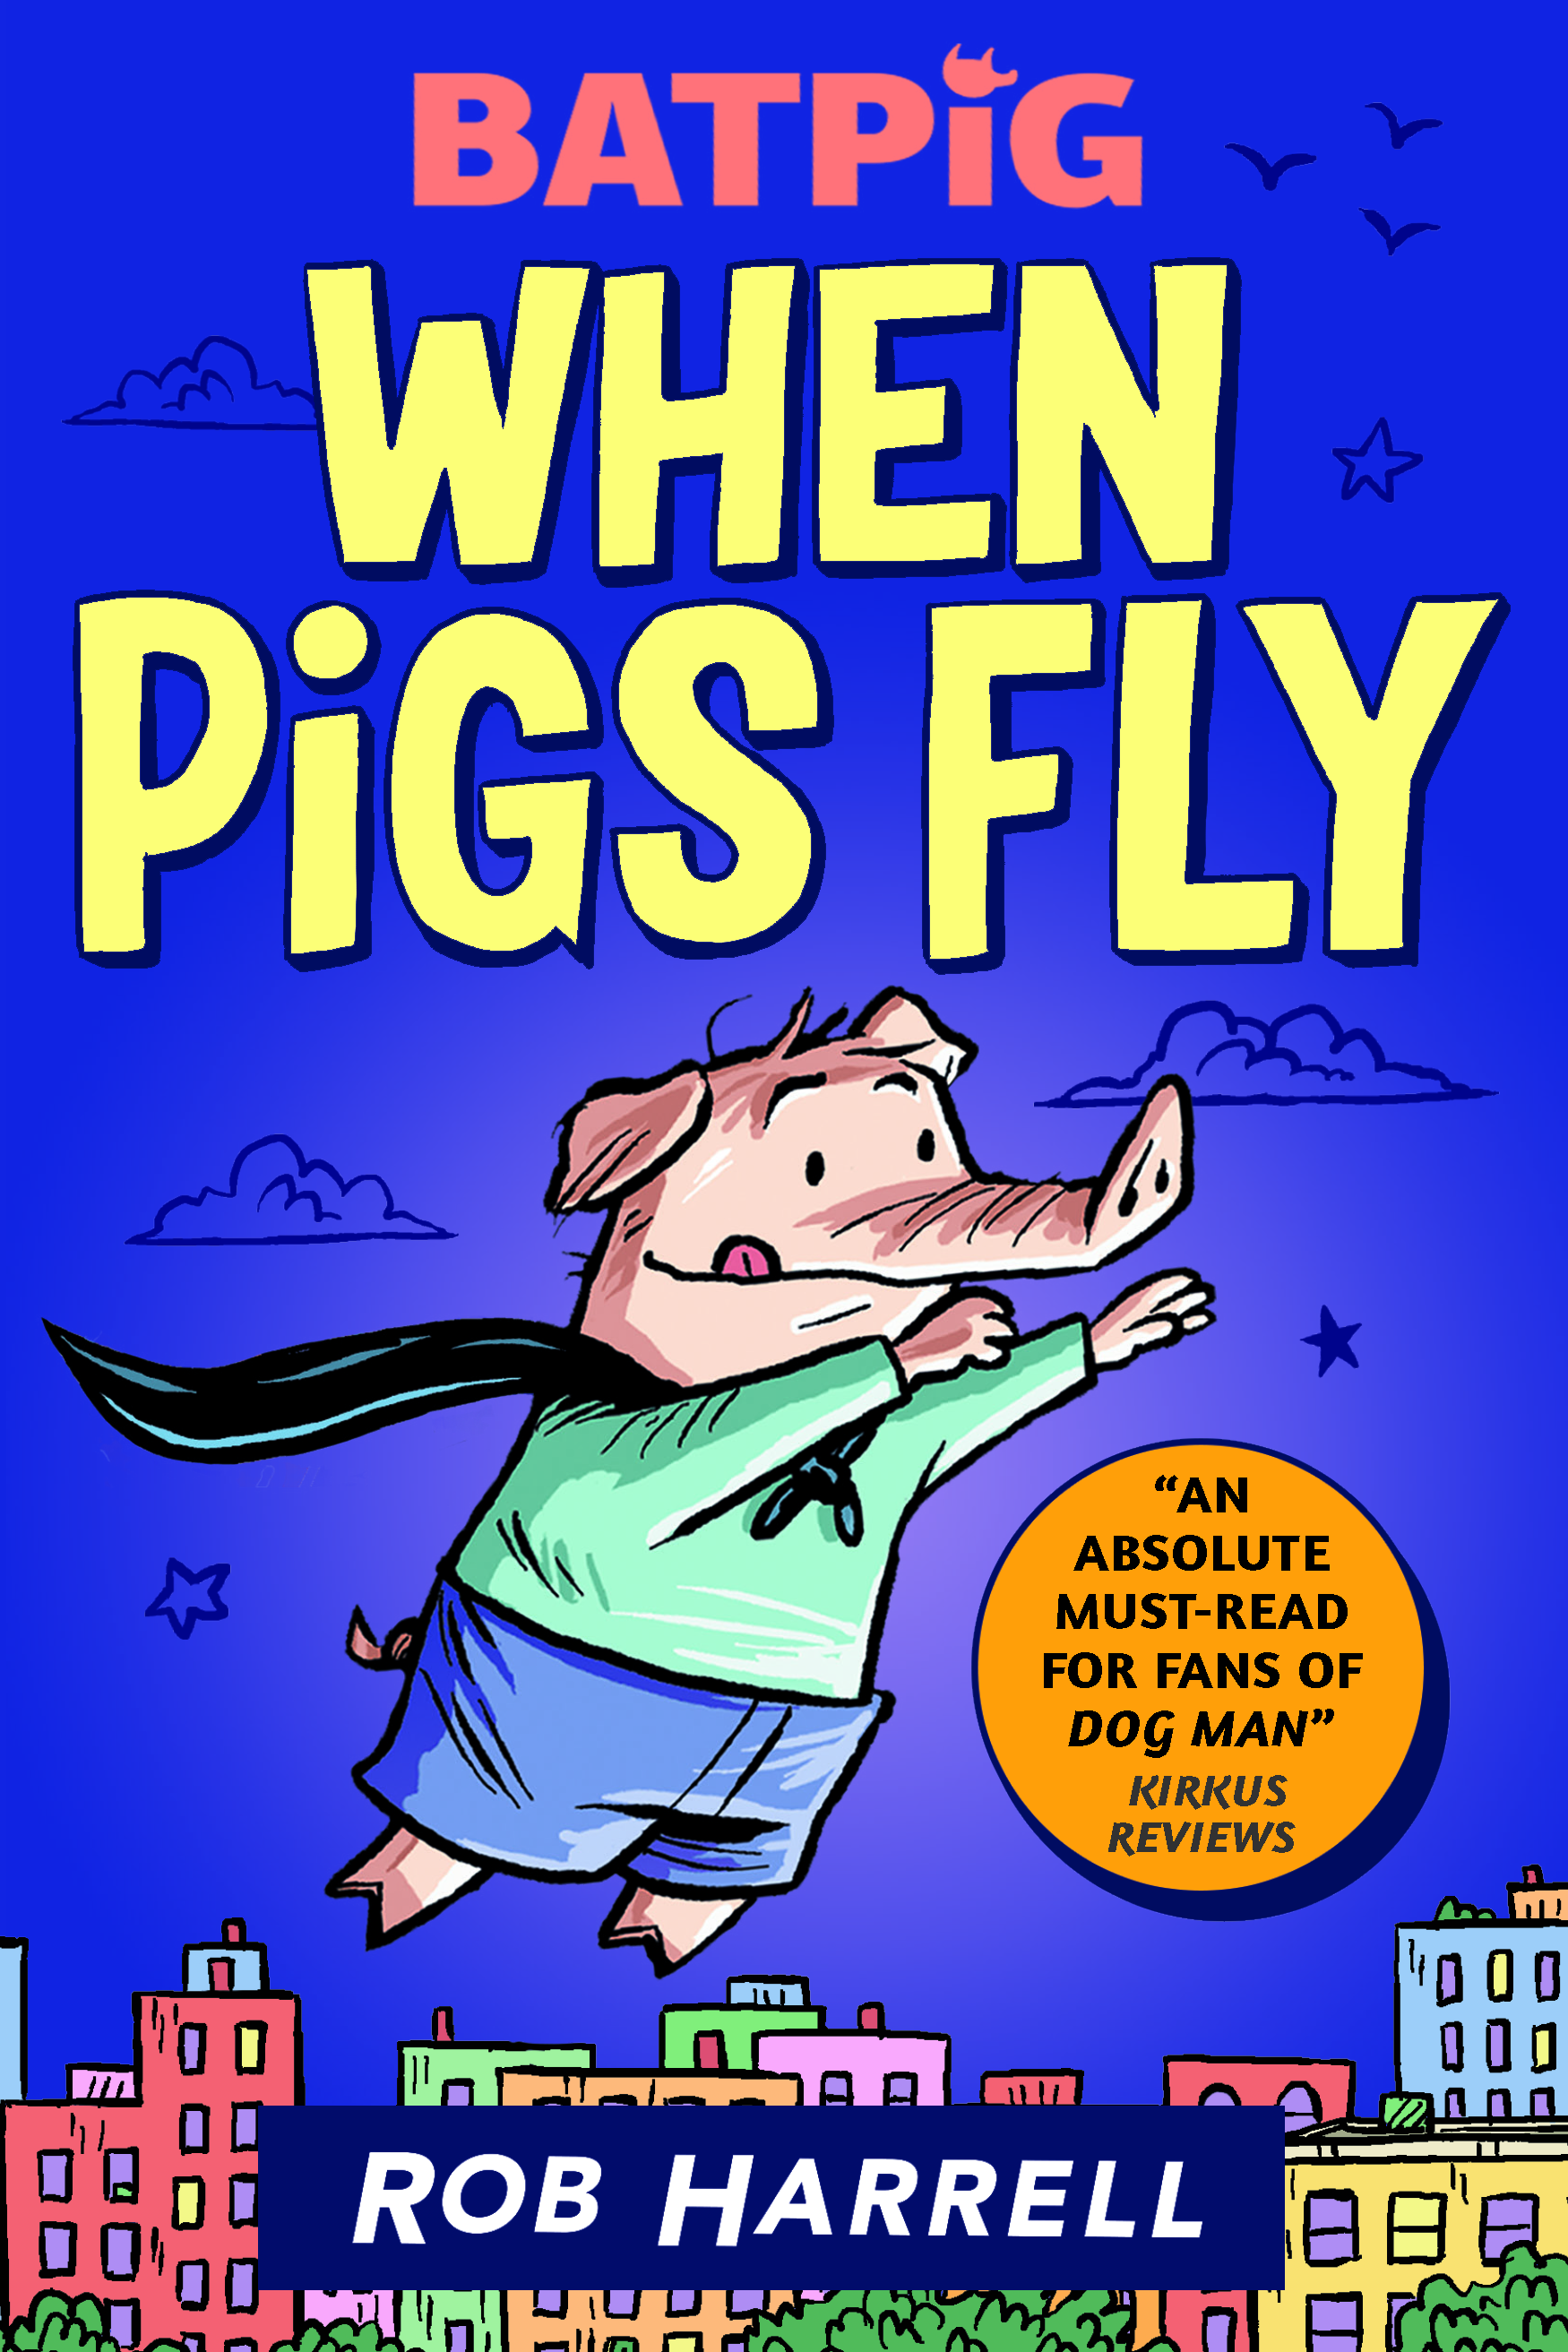 Batpig-When-Pigs-Fly